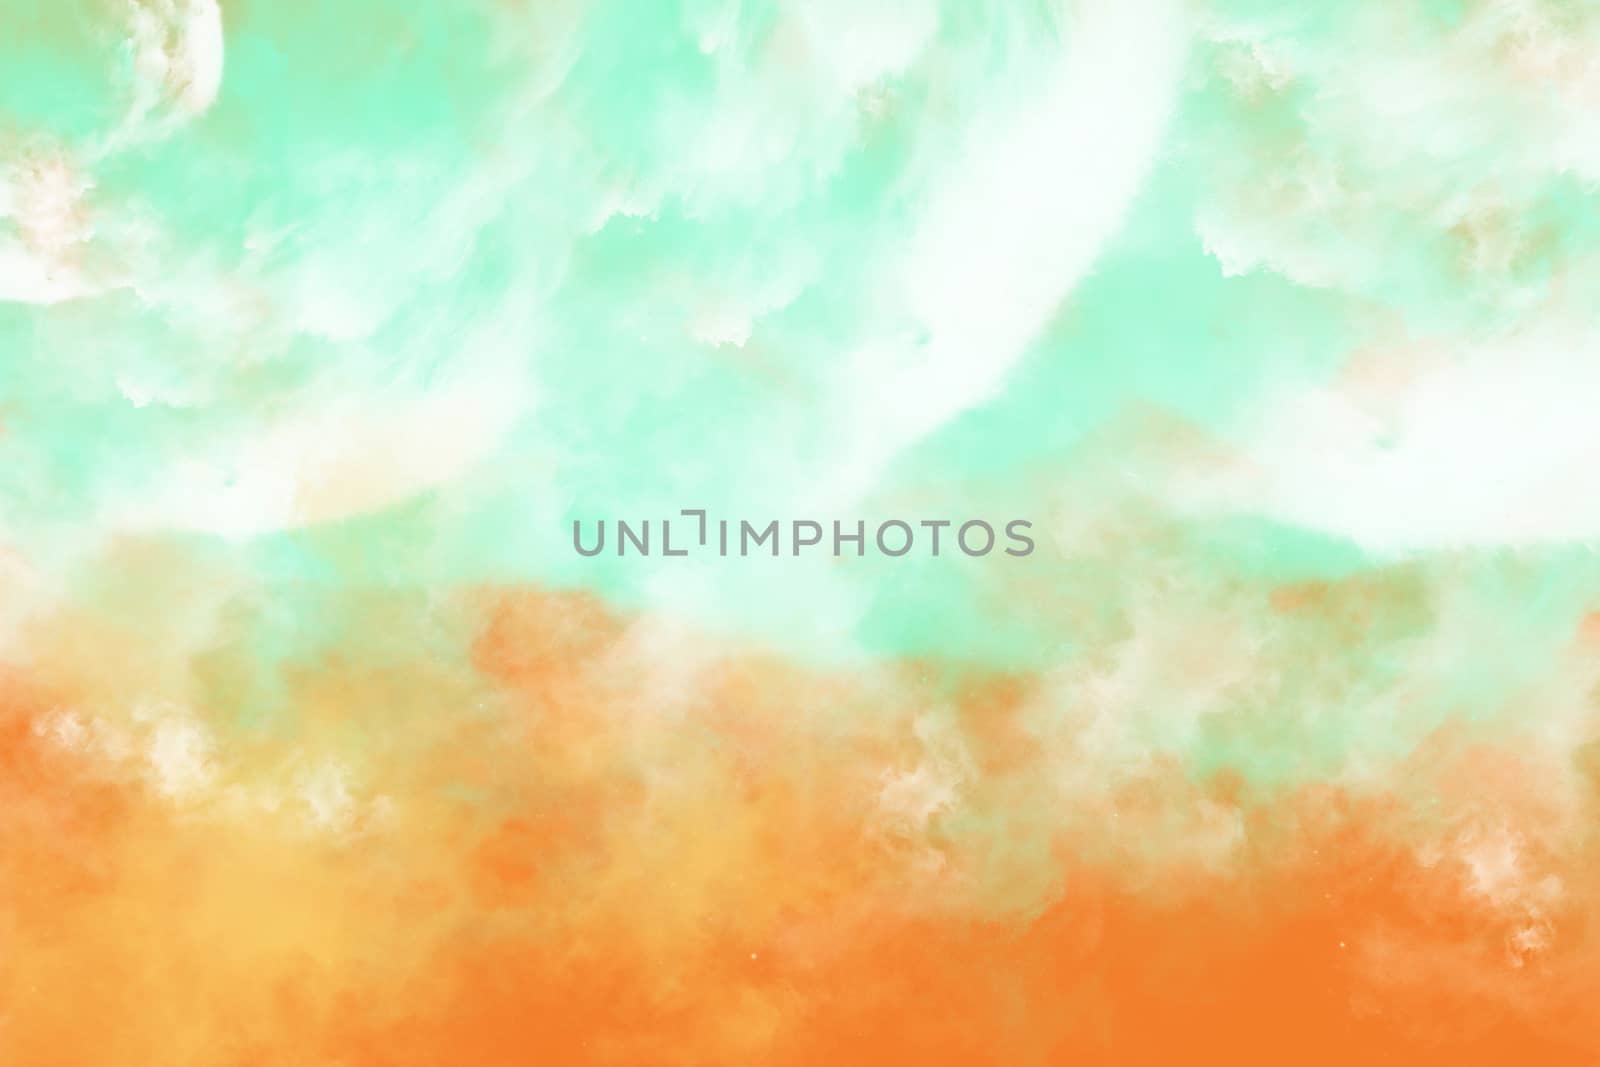 Abstract image of sea and sand beach in aqua menthe color tone for background, digital illustration